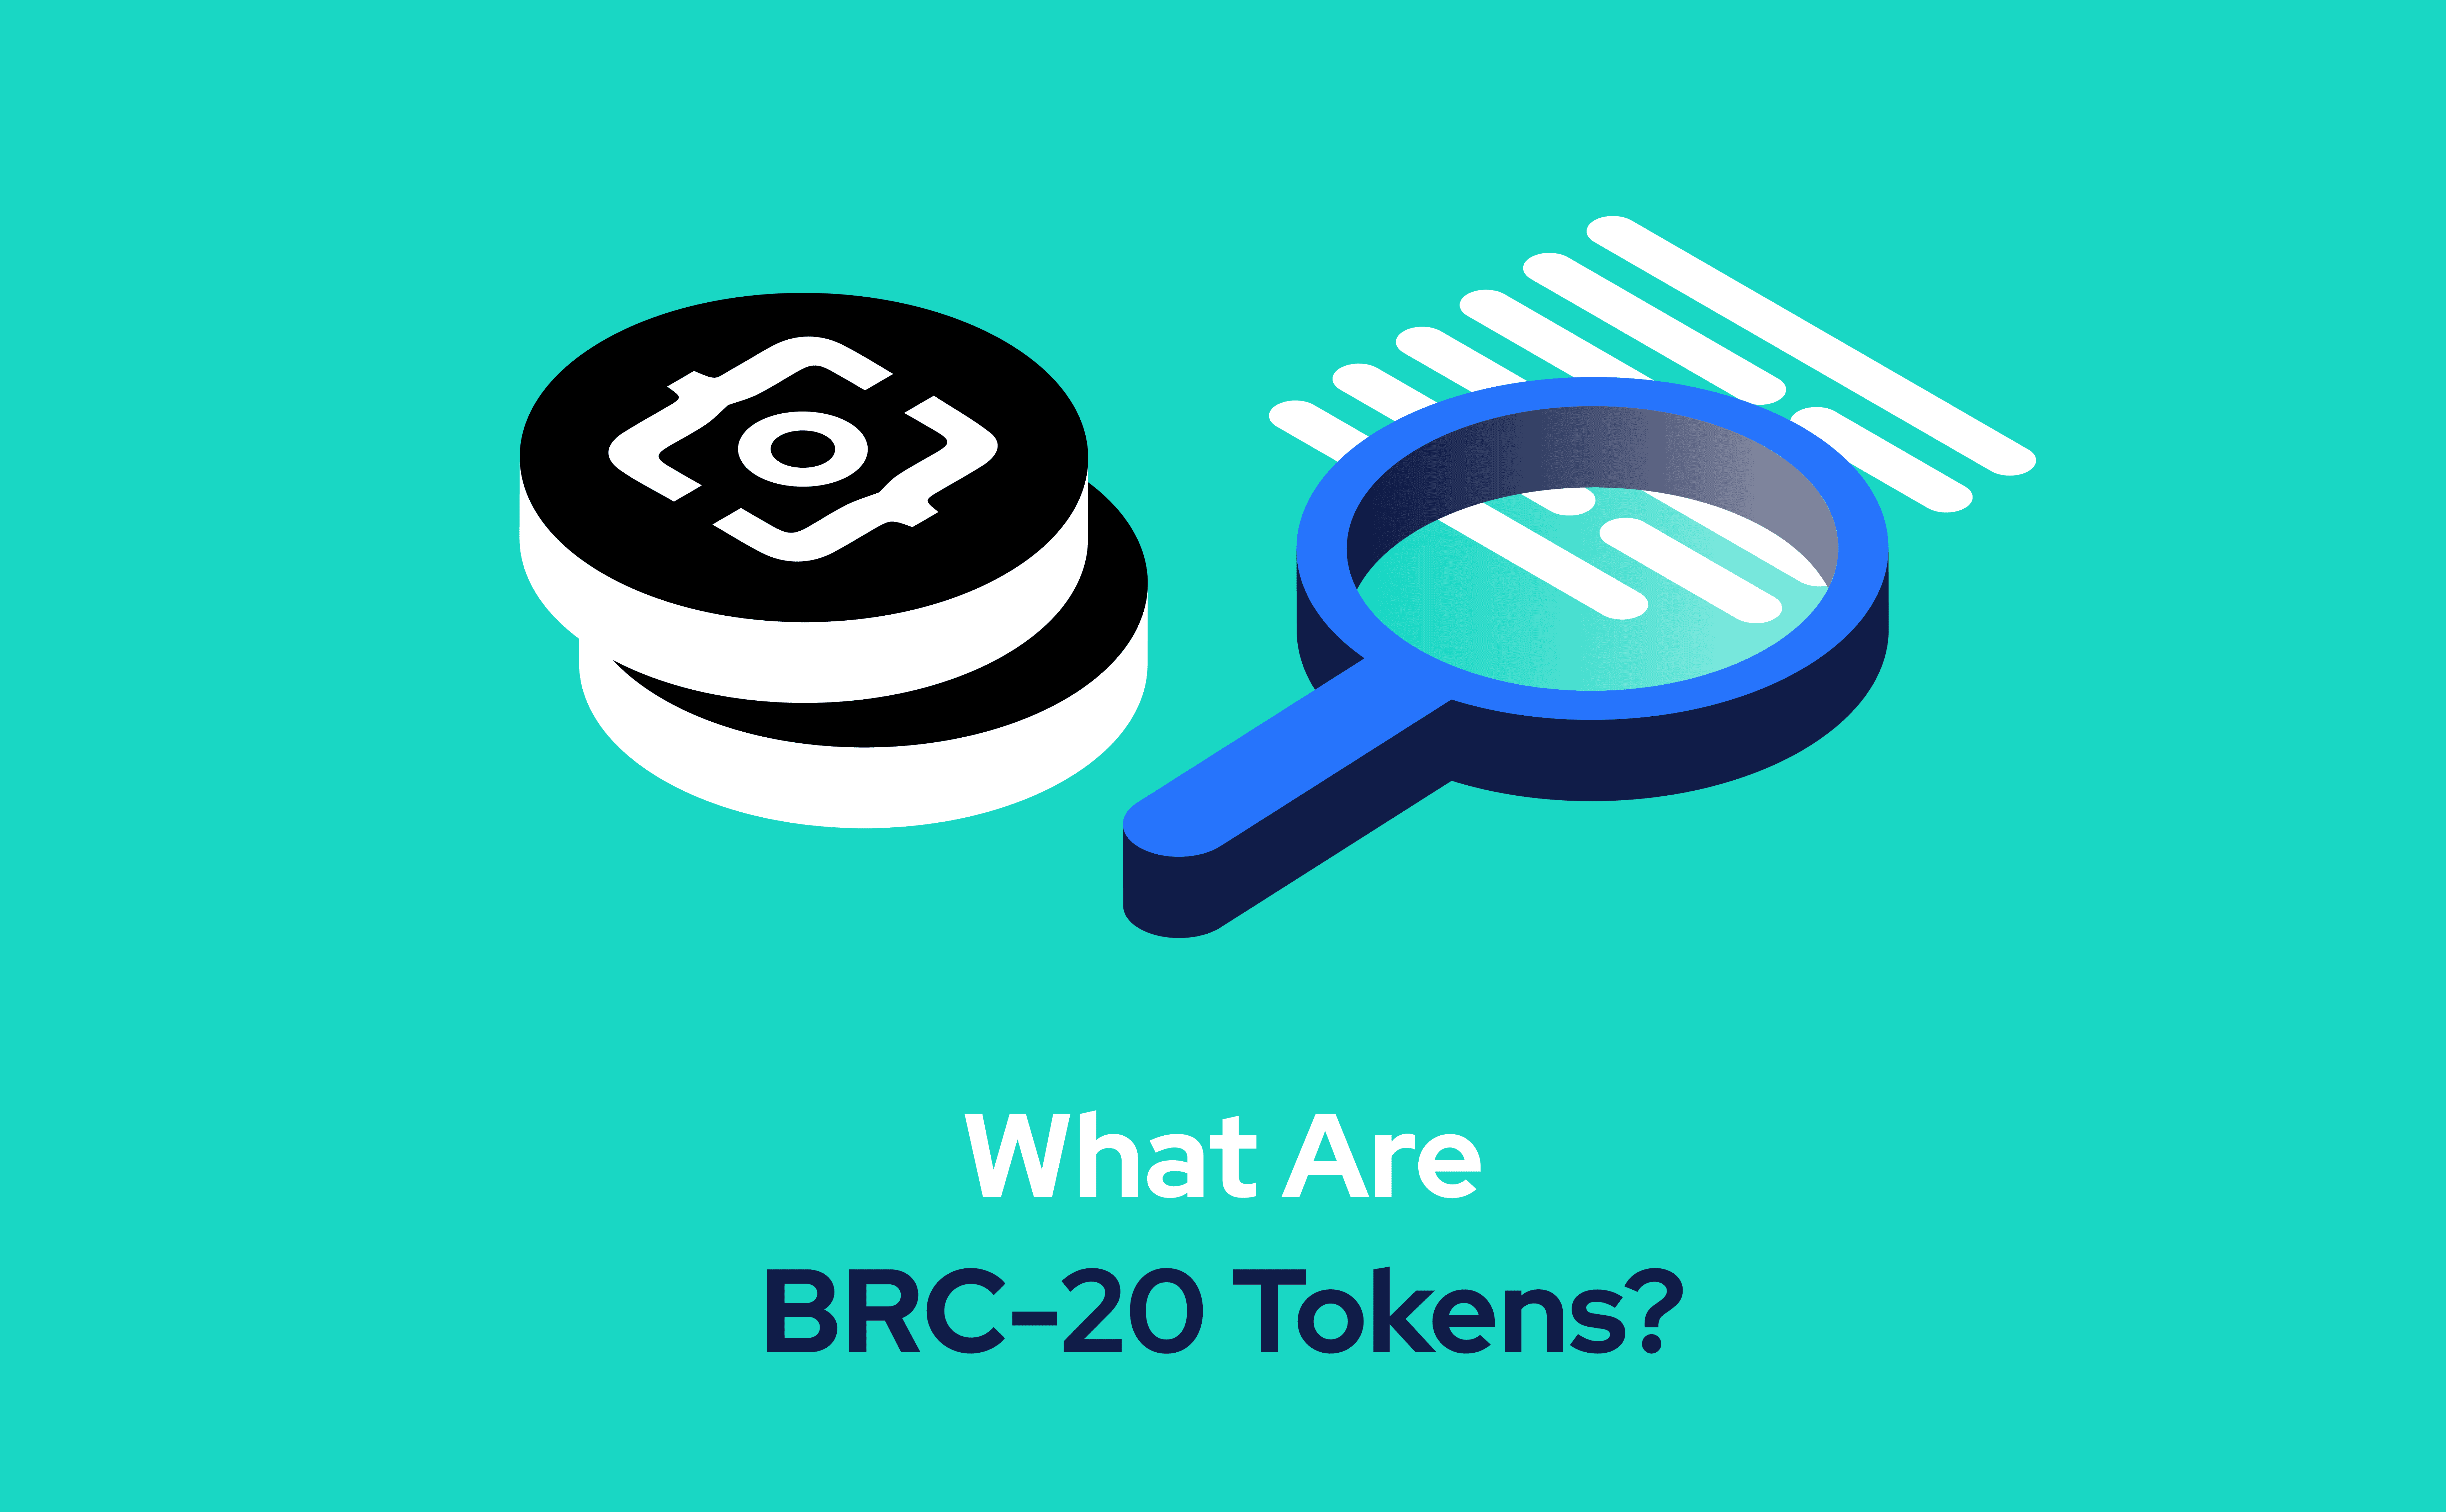 What Are ORDI, PEPE, MEME and other BRC-20 Tokens?